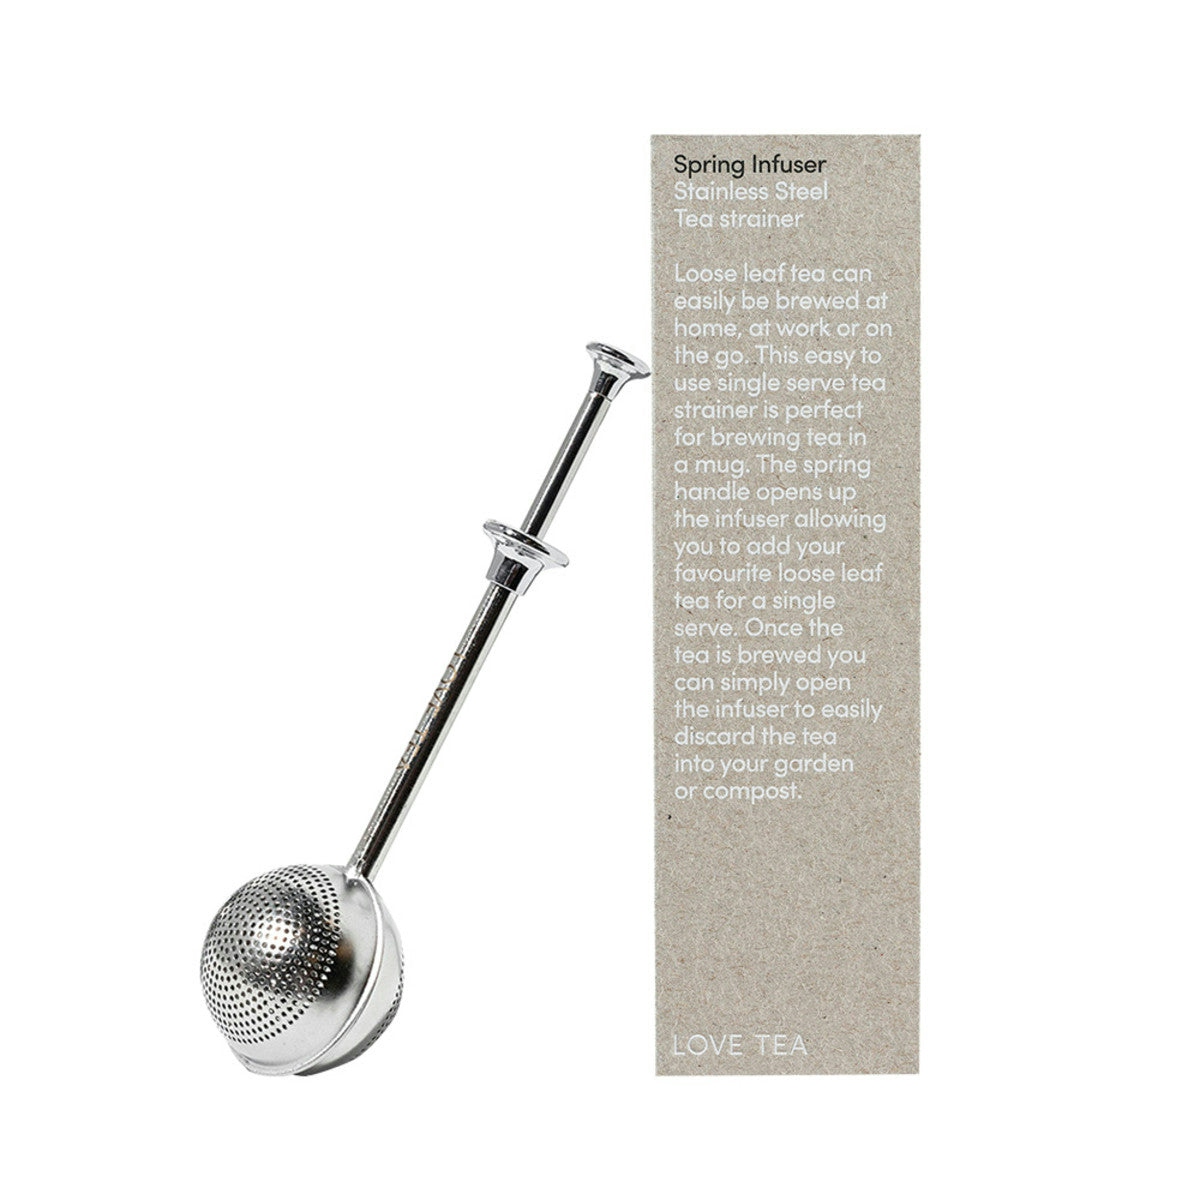 image of Love Tea Spring Infuser on white background 